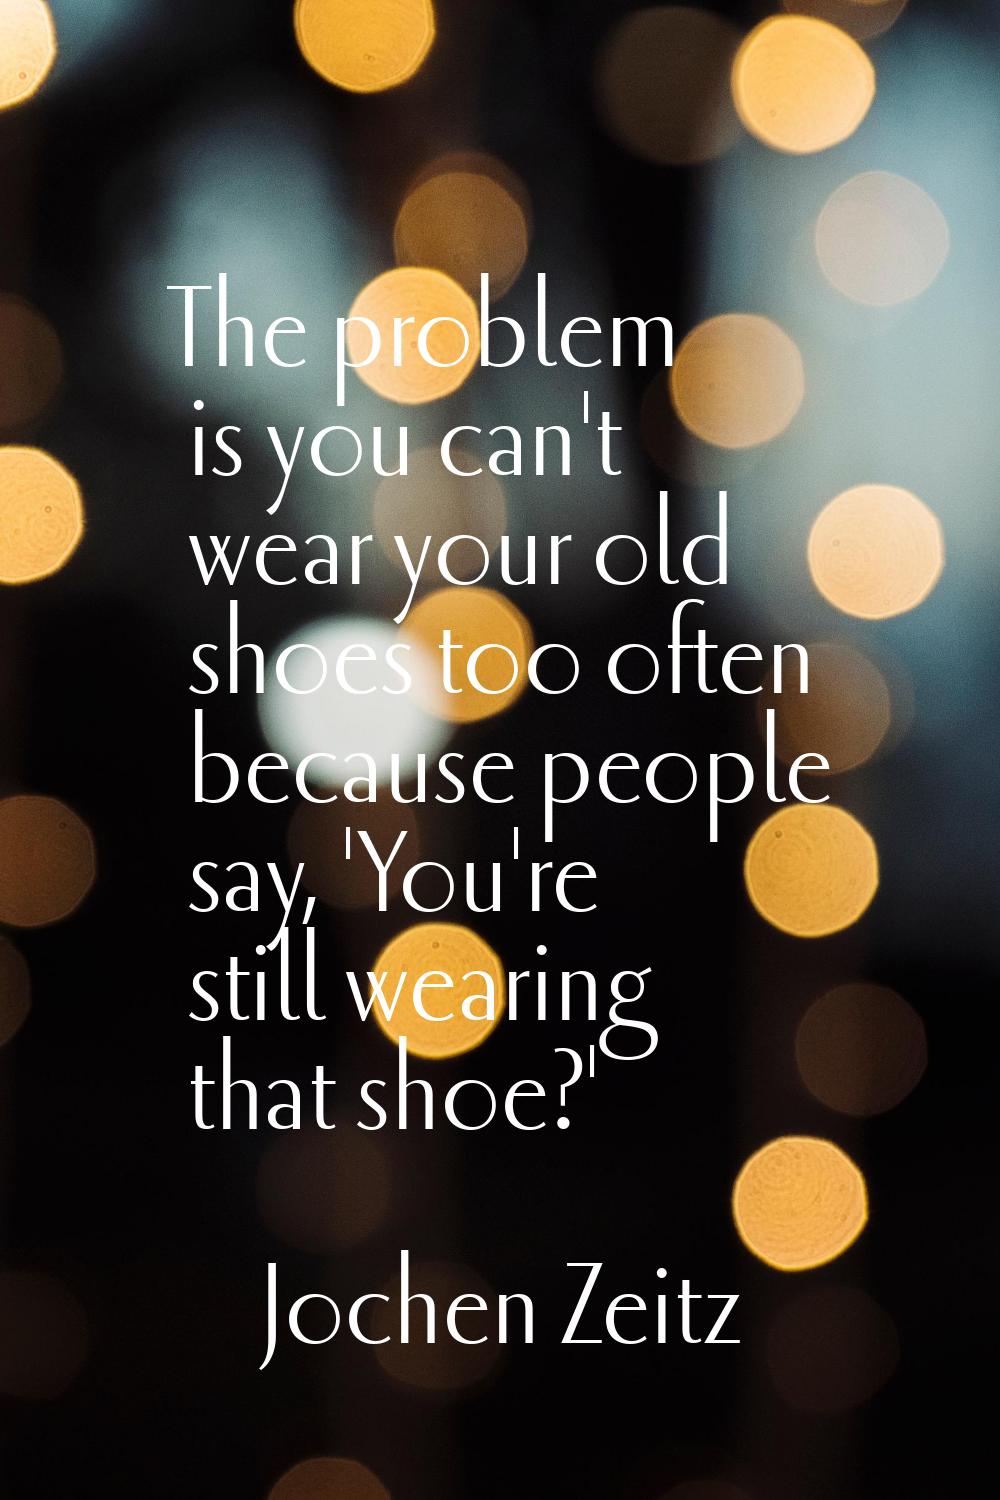 The problem is you can't wear your old shoes too often because people say, 'You're still wearing th